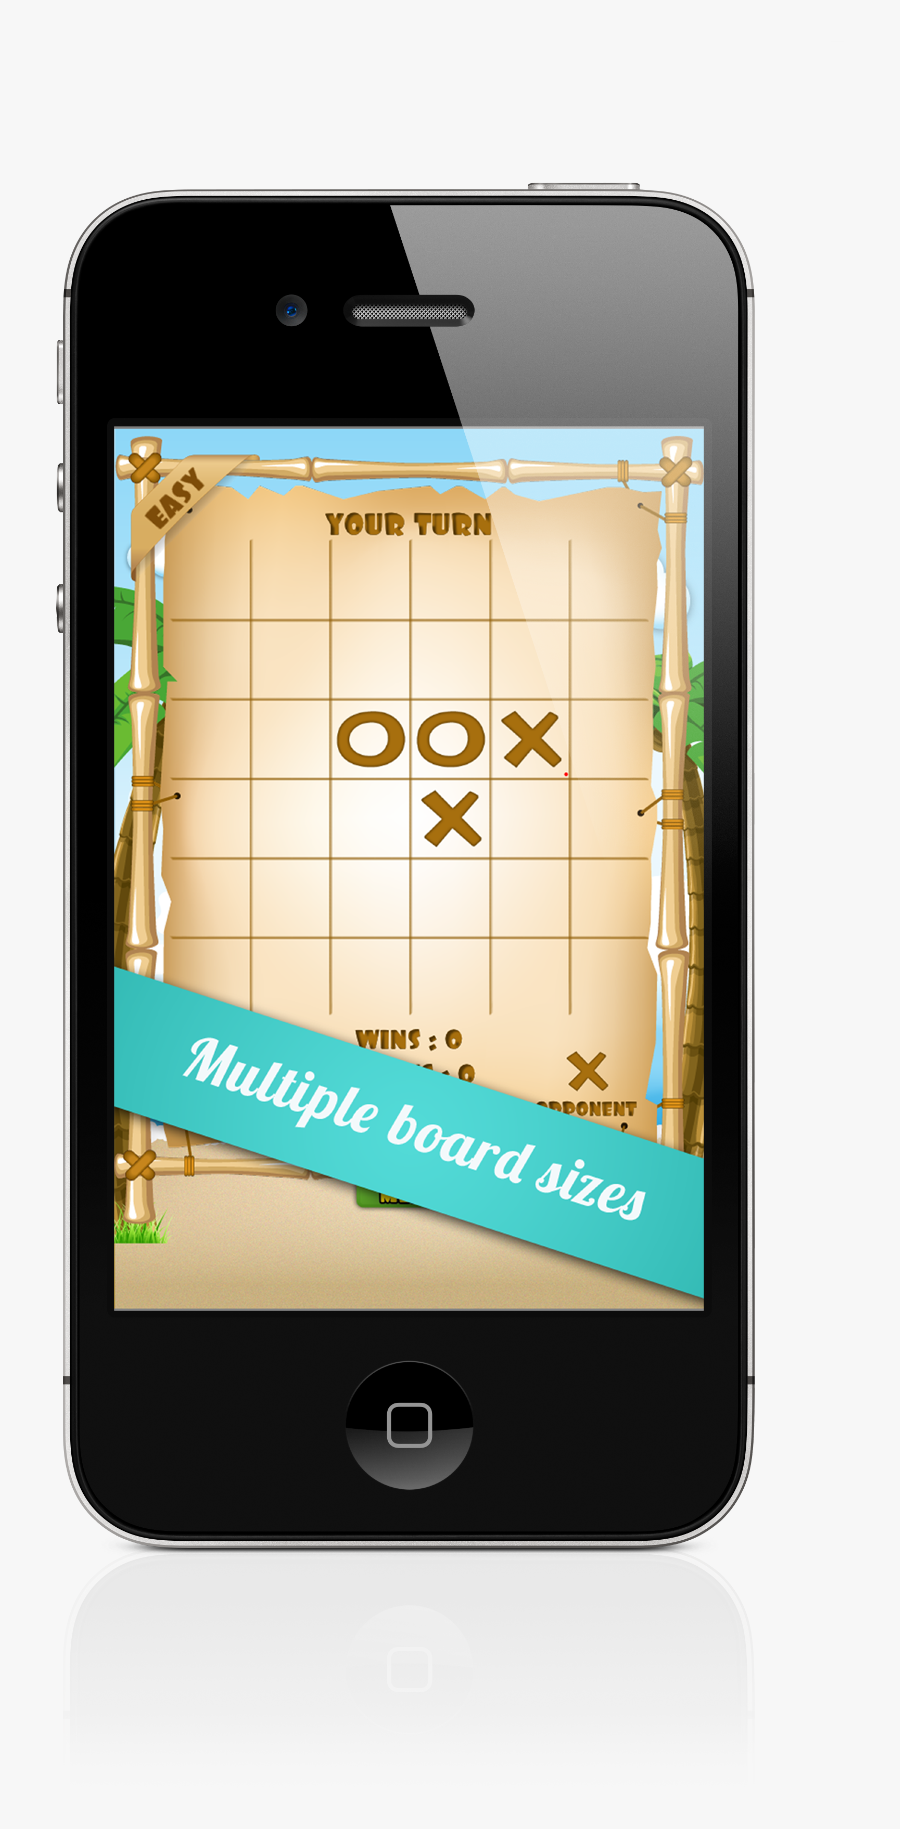 Tic Tac Toe Is A Well-known, Classic Board Game - Stationnement De Montreal App, Transparent Clipart